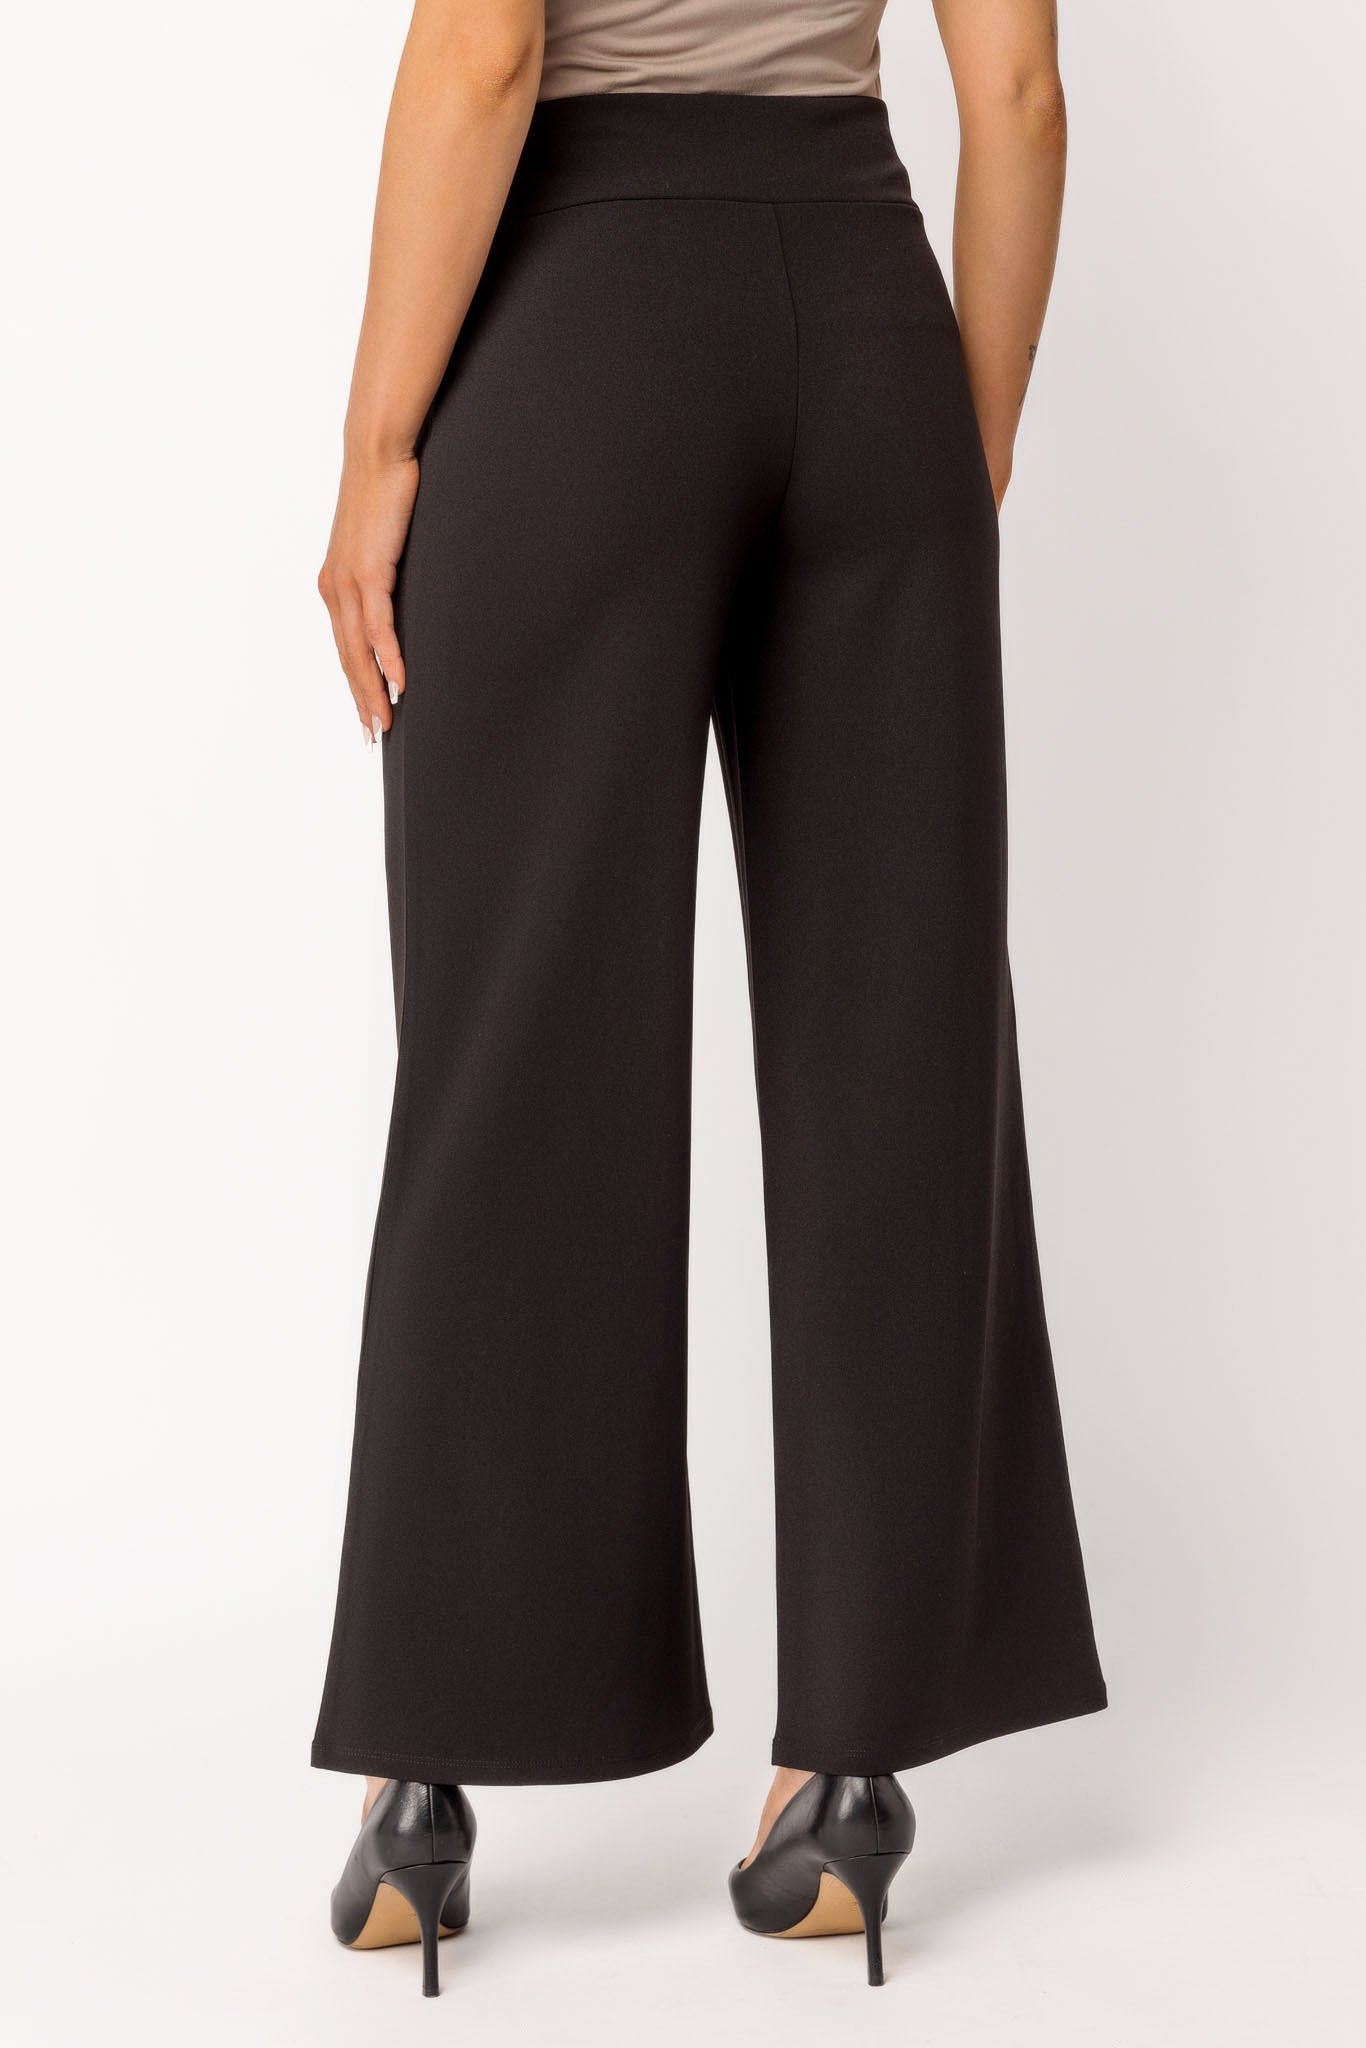 Wide Leg Pants with Short Inseam